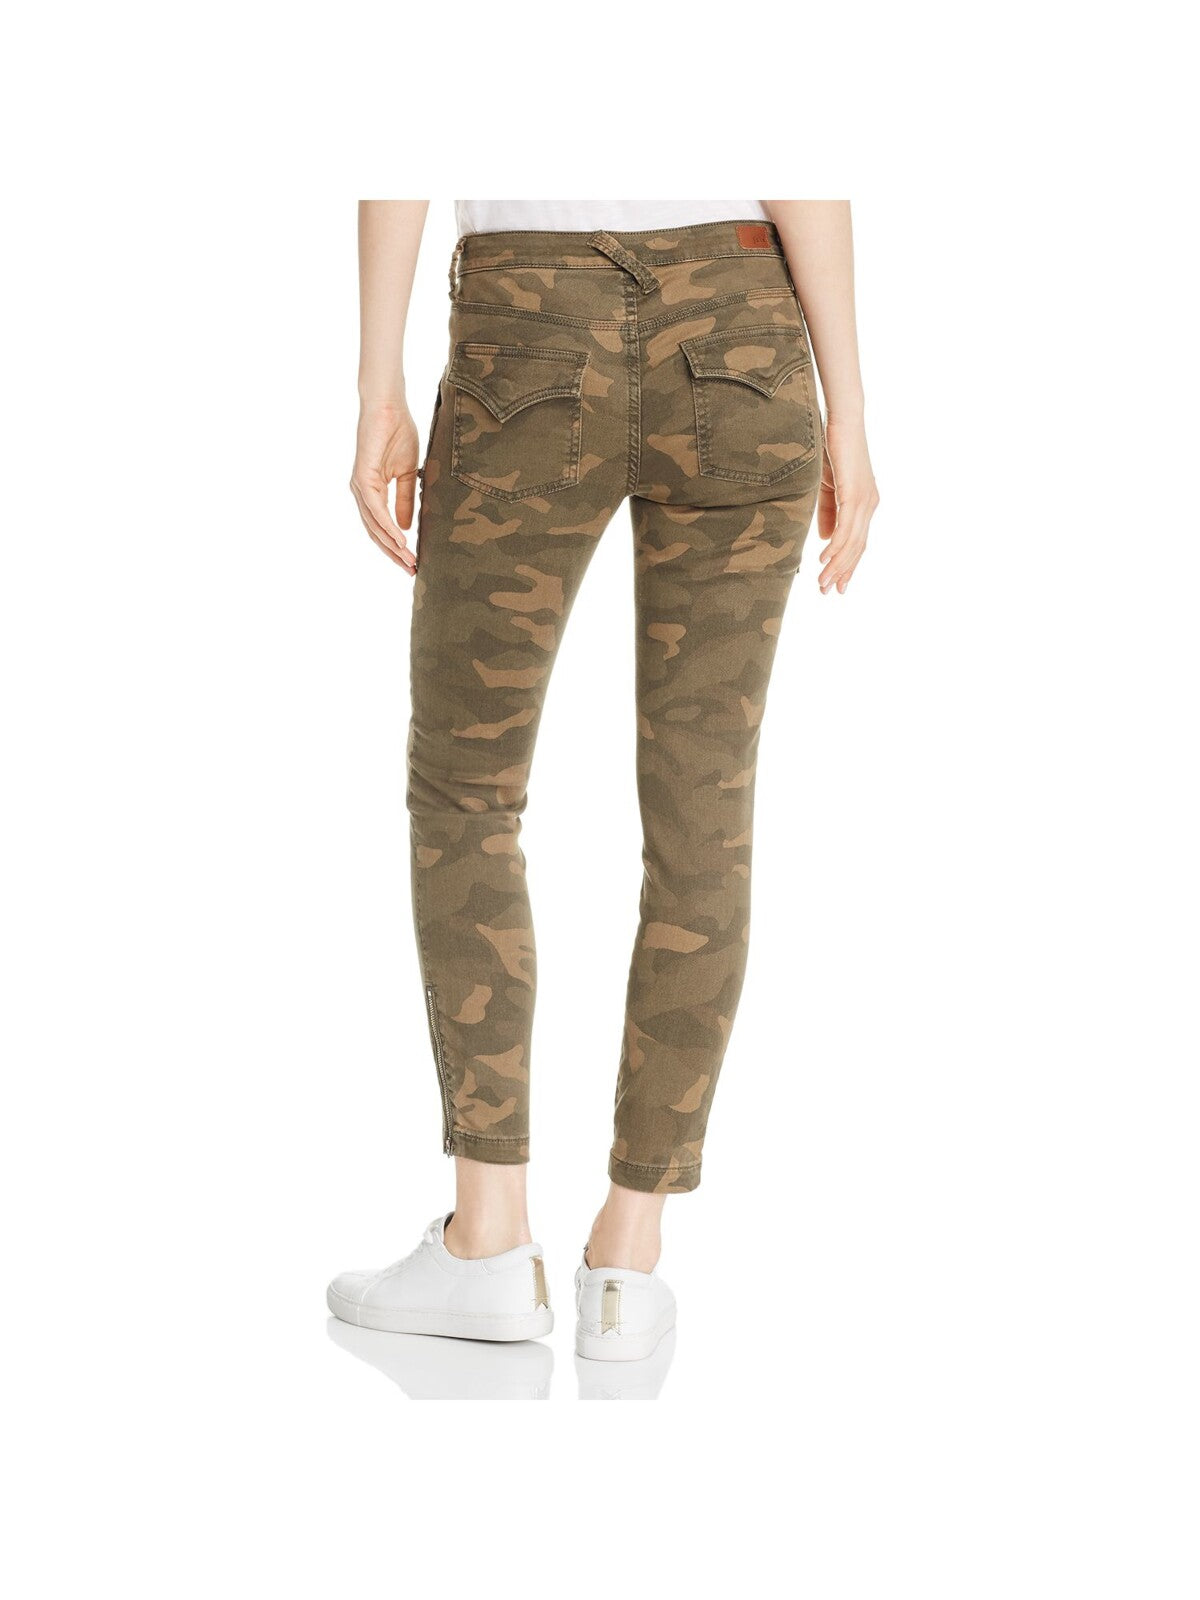 JOSIE Womens Green Stretch Zippered Pocketed Cargo Camouflage Skinny Pants 24